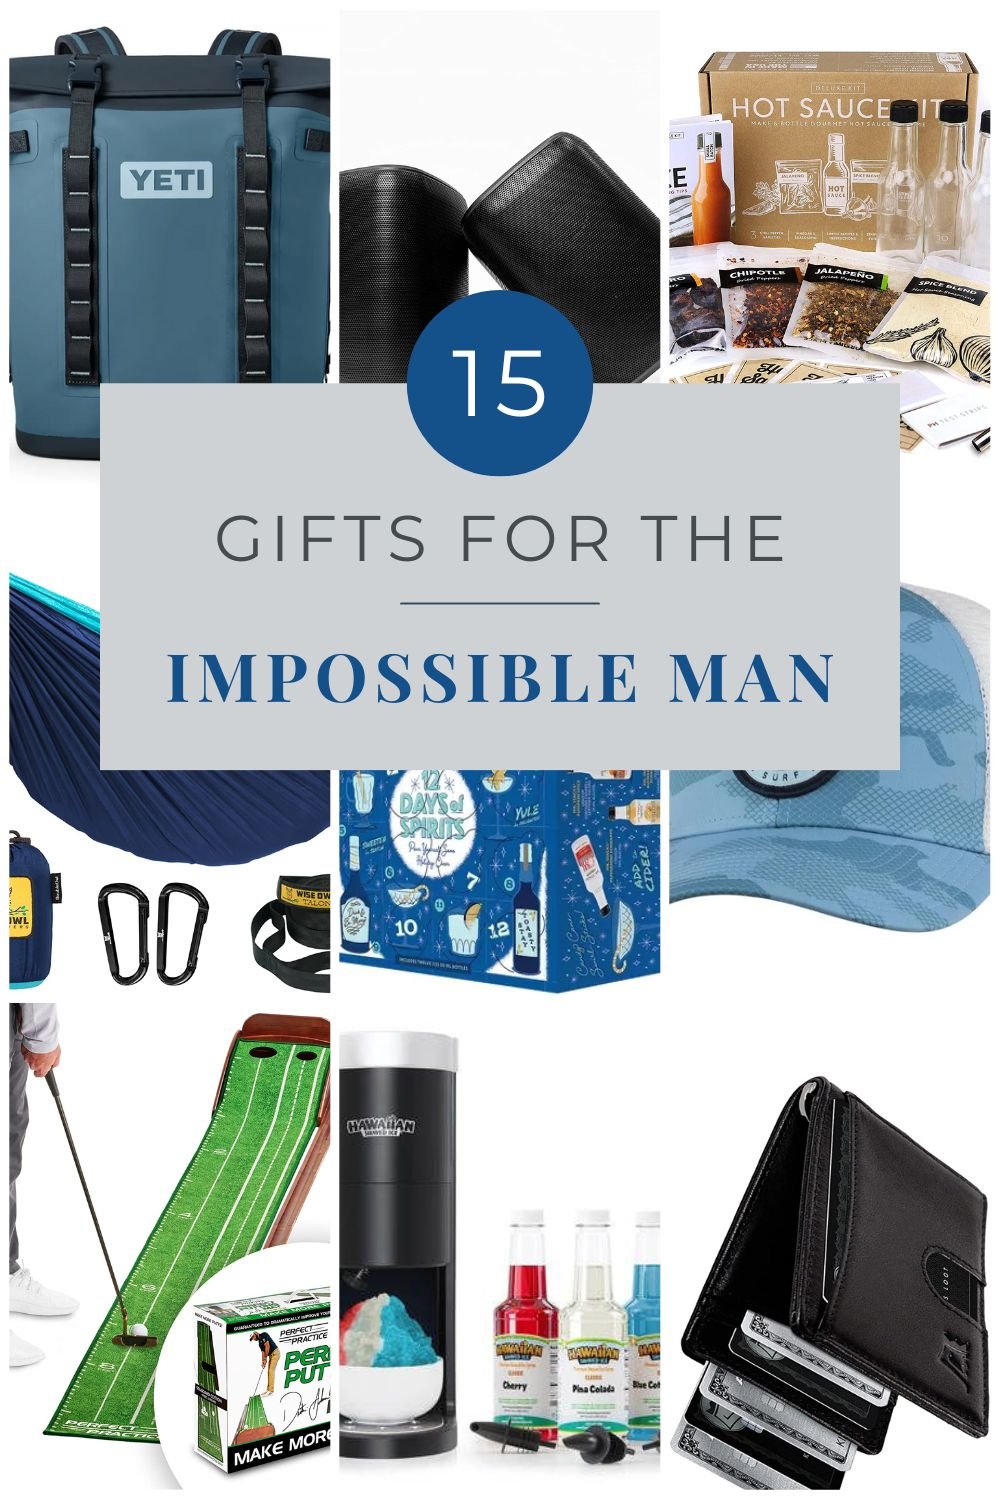 9 different mens gifts with text on image for Pinterest.